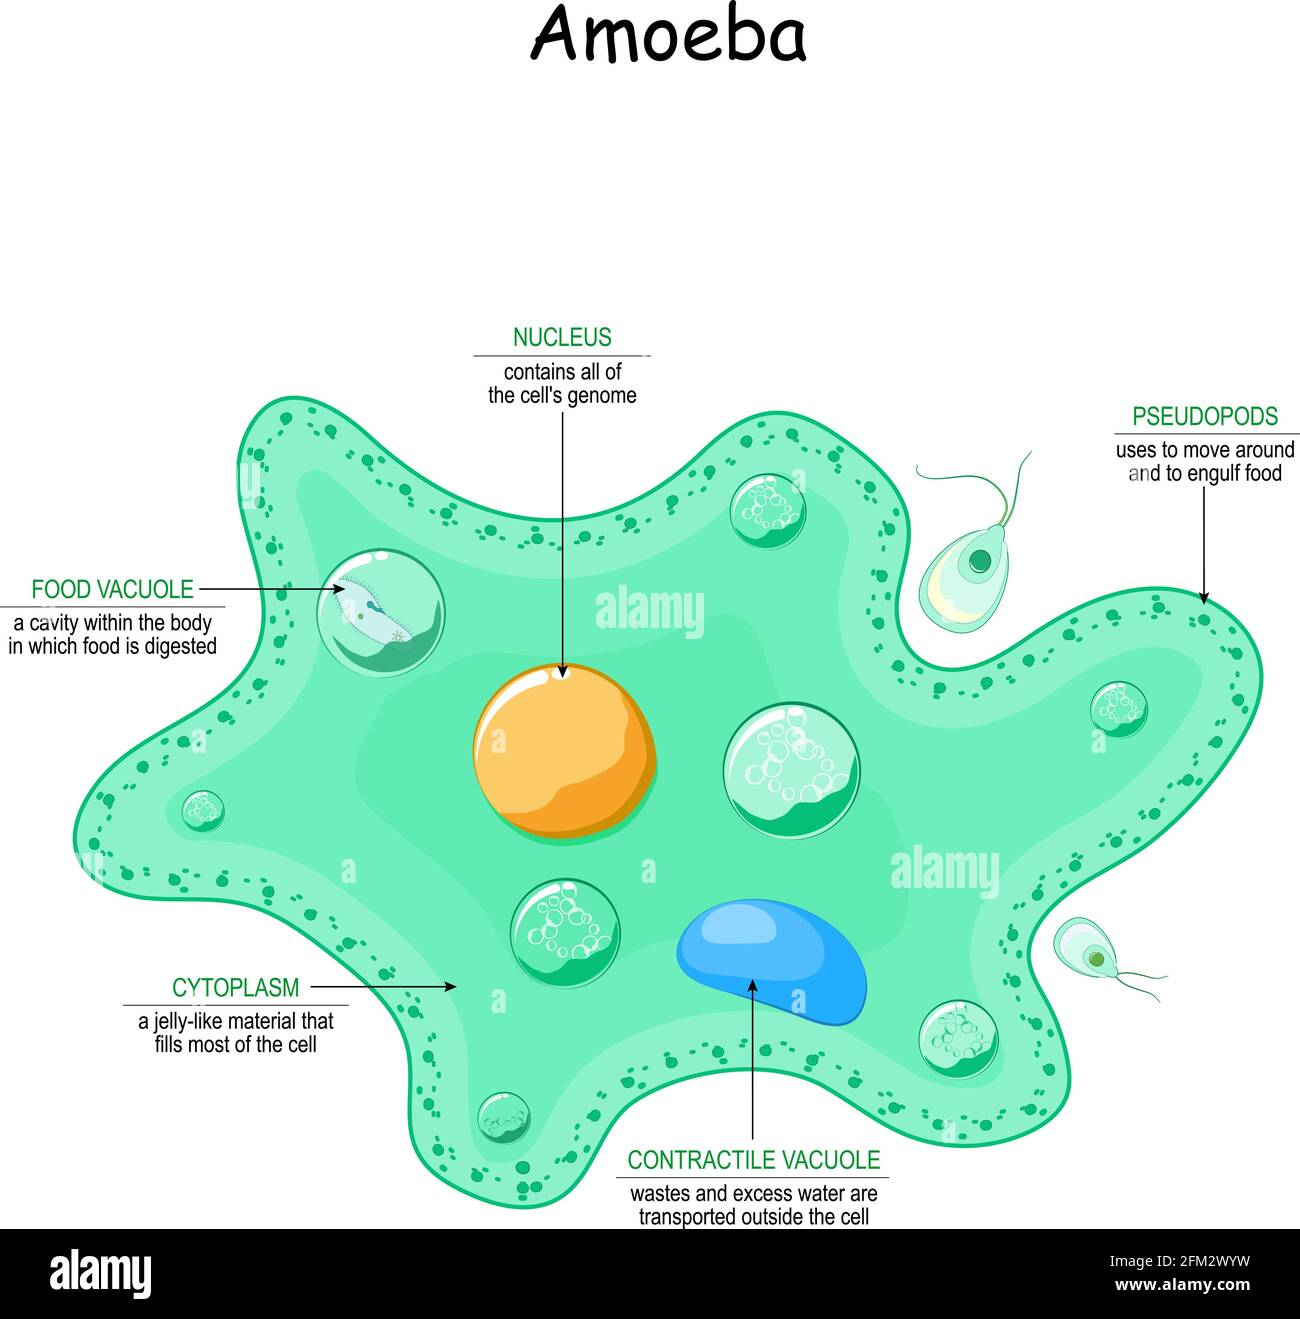 Amoeba anatomy. unicellular animal with pseudopods. Vector illustration for medical, educational and science use Stock Vector